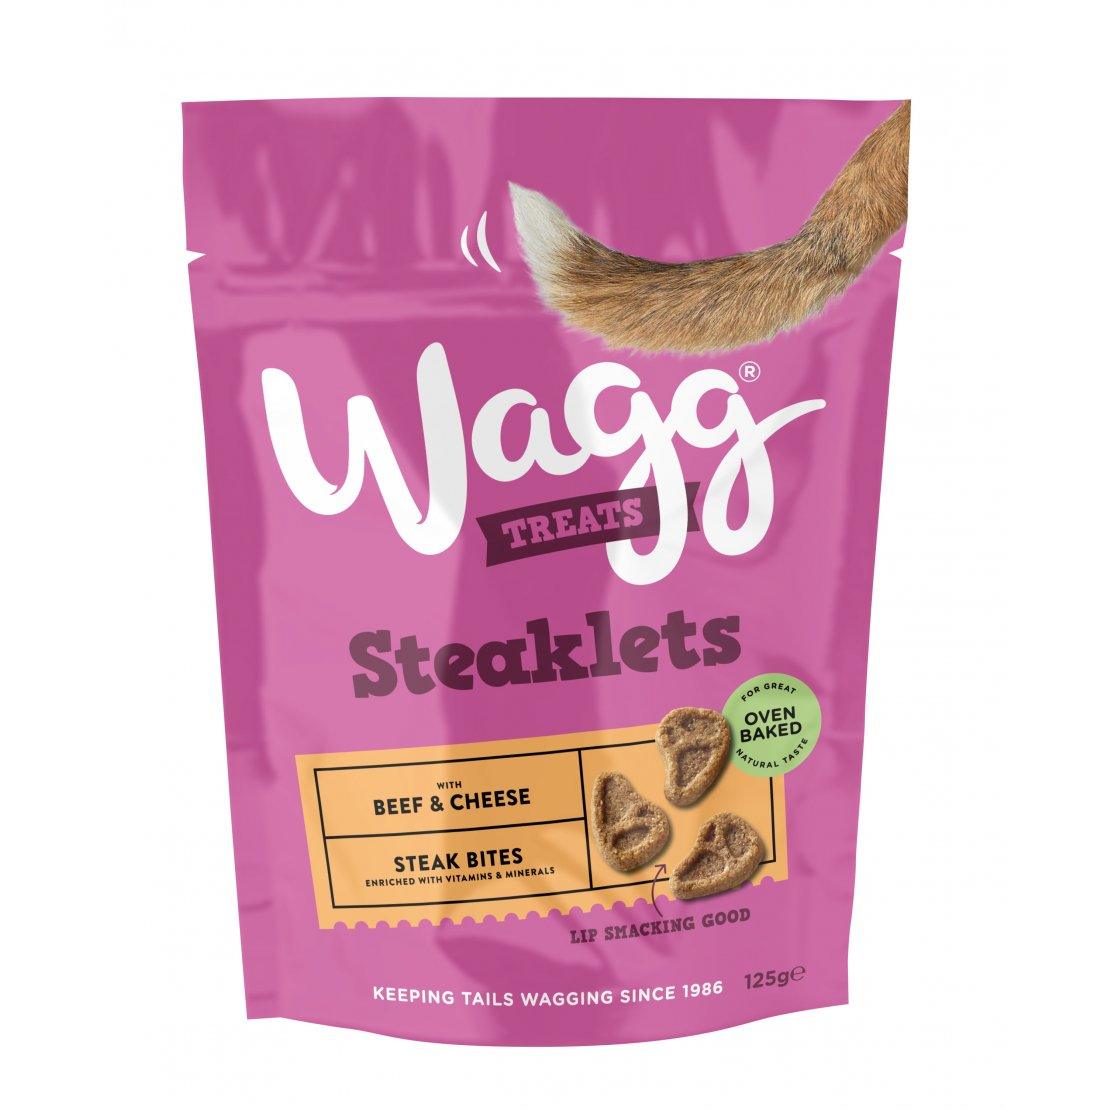 WAGG Steaklets Treats With Beef and Cheese - Pets Villa